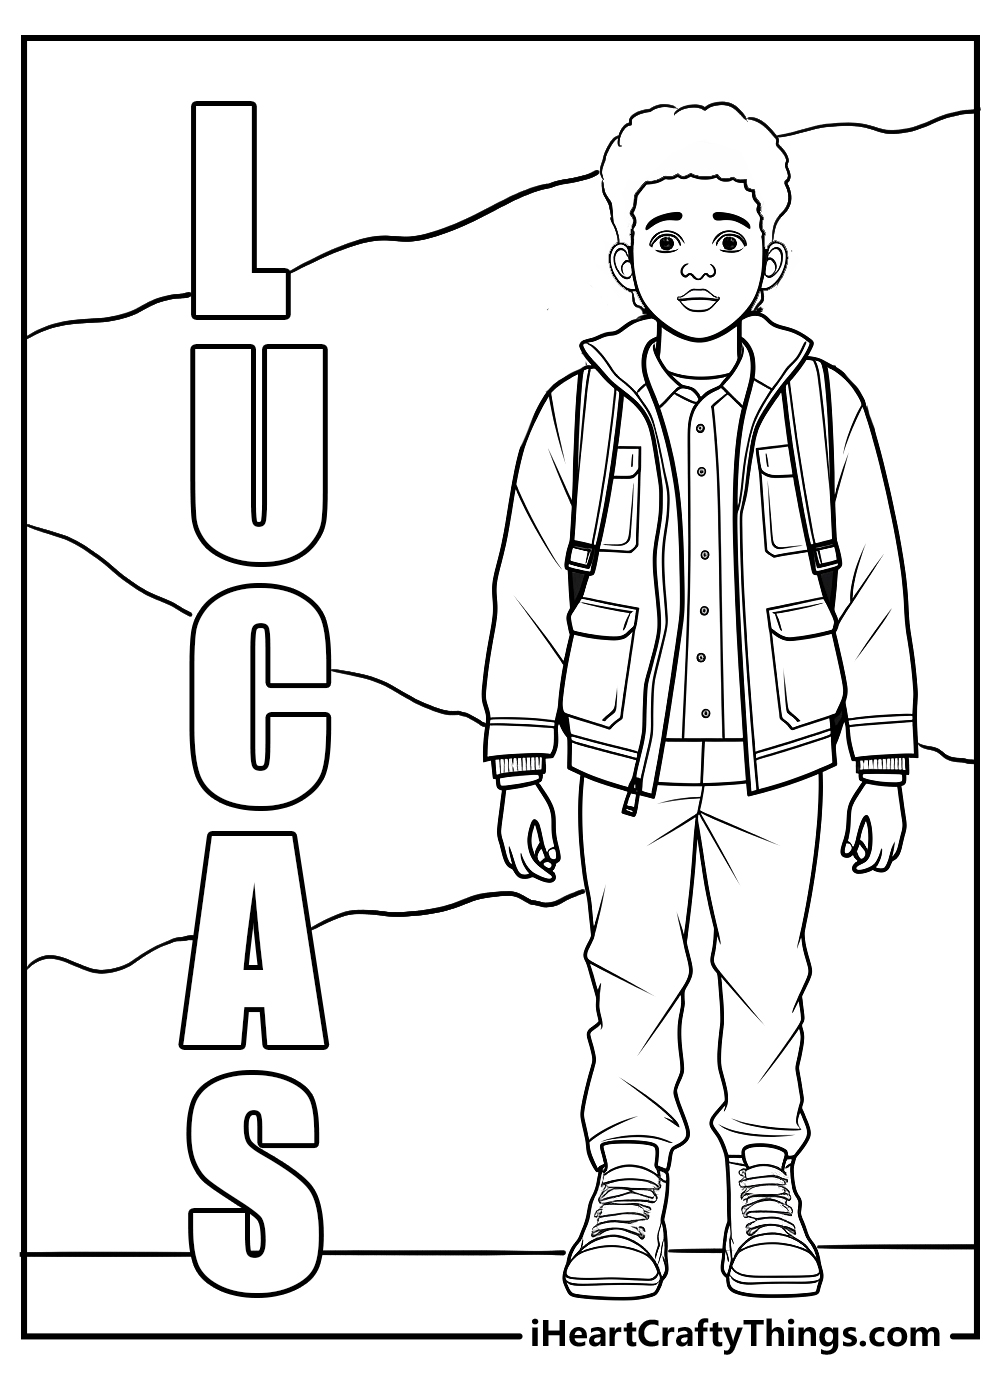 lucas from stranger things coloring pages